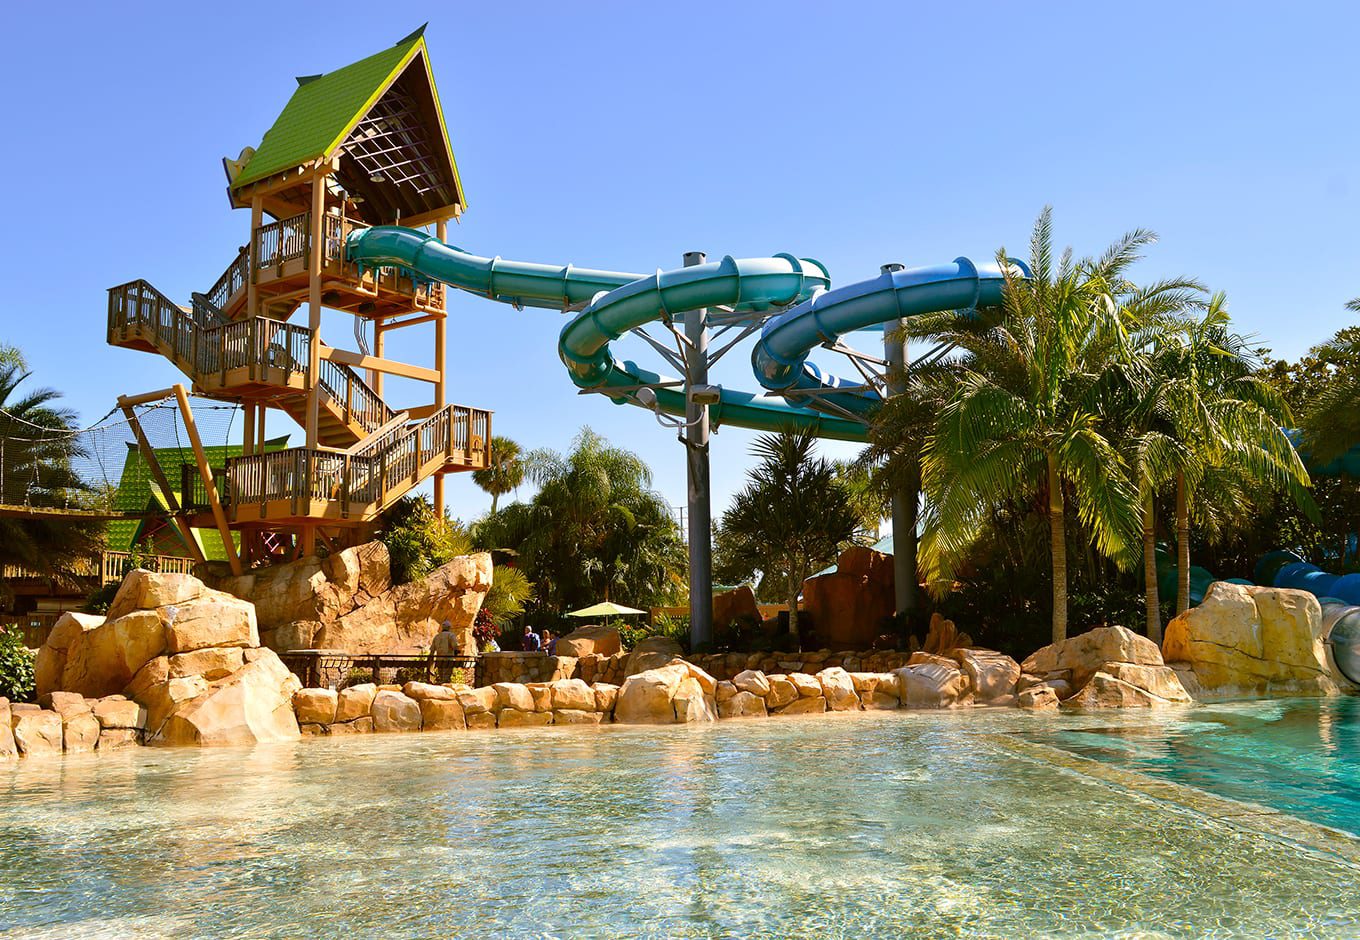 View of ttwo waterslides and a pristine pool surrounded by palm trees at the Aquatica Water Park, Orlando.